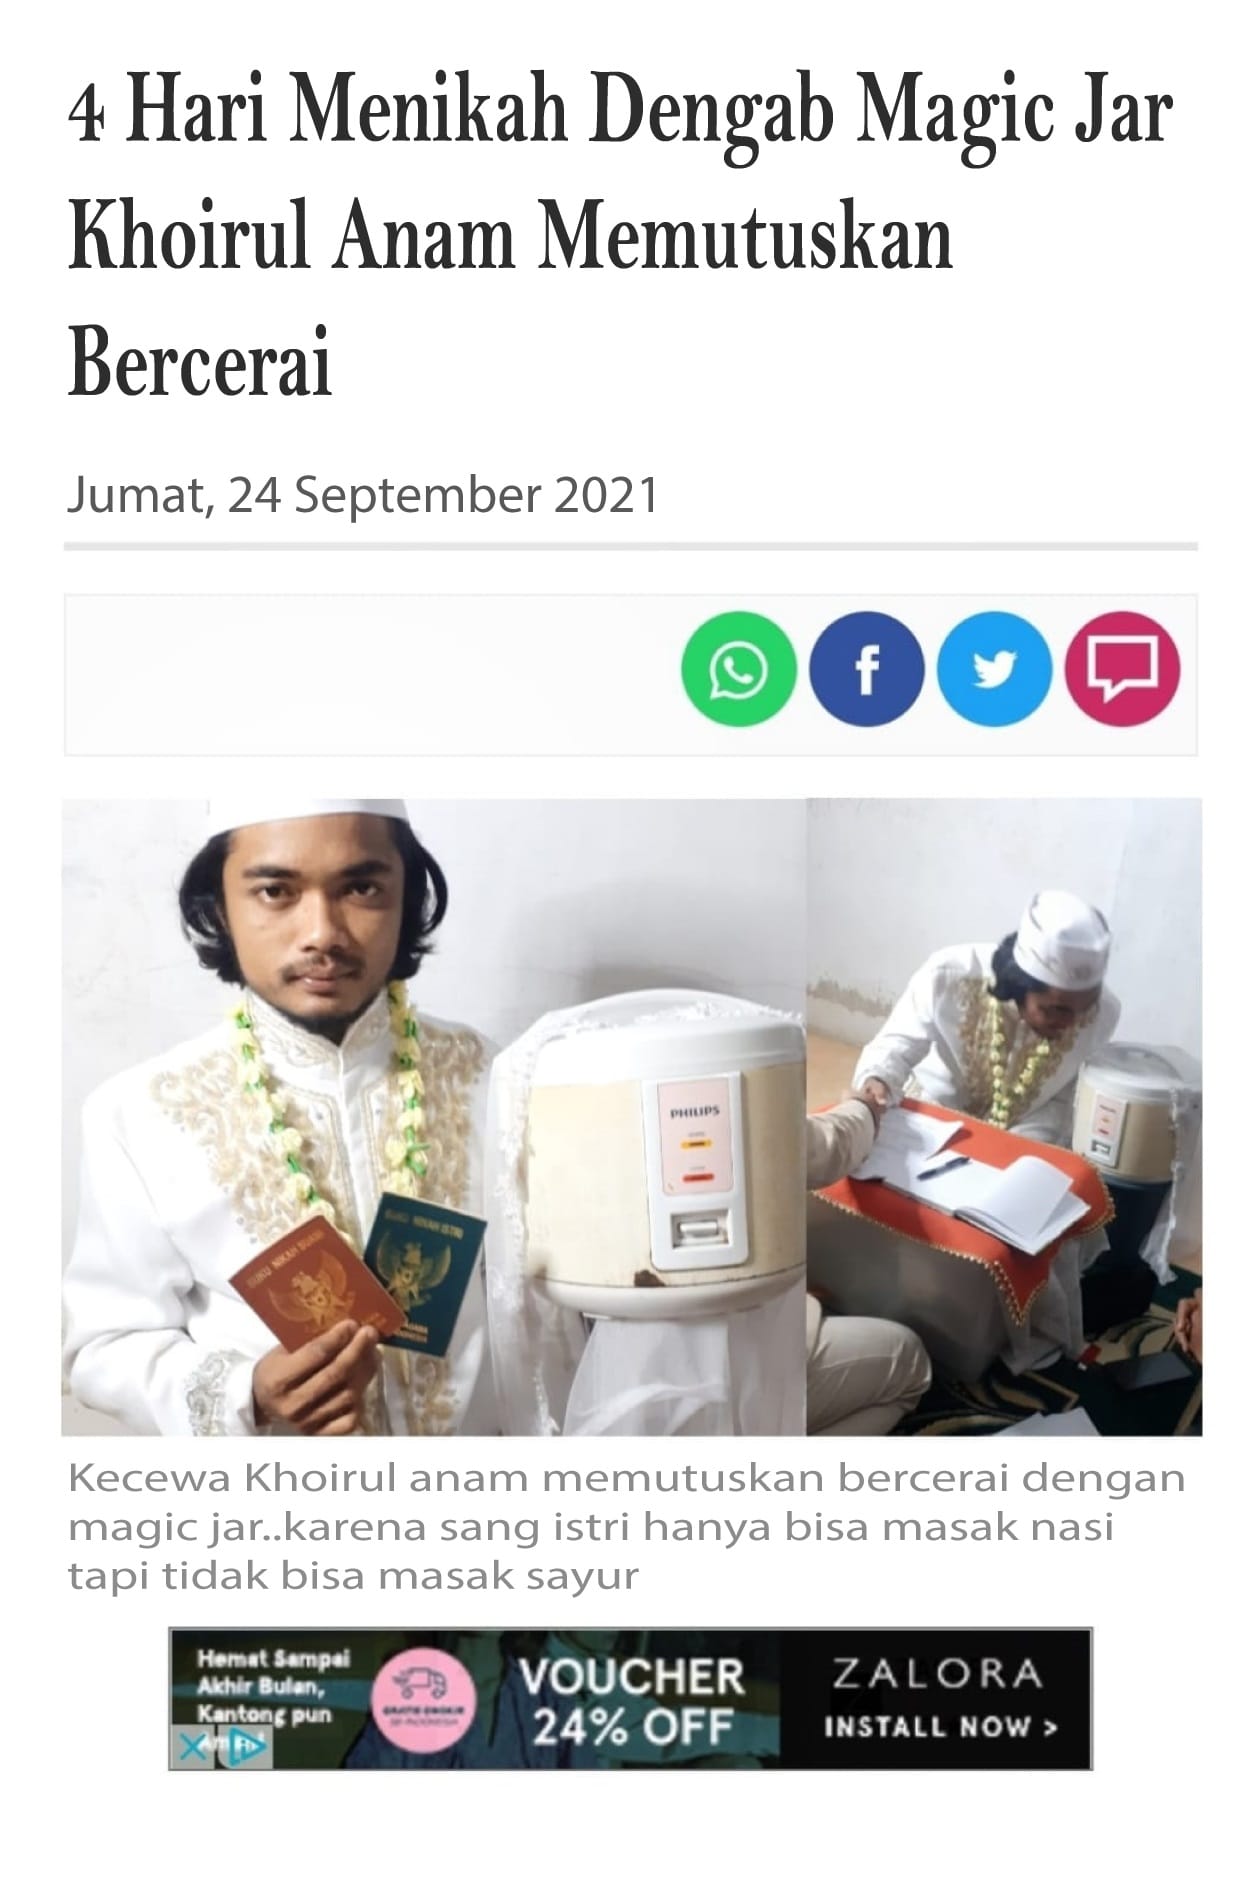 Indonesian man married a rice cooker and got a divorce 4 days later 4